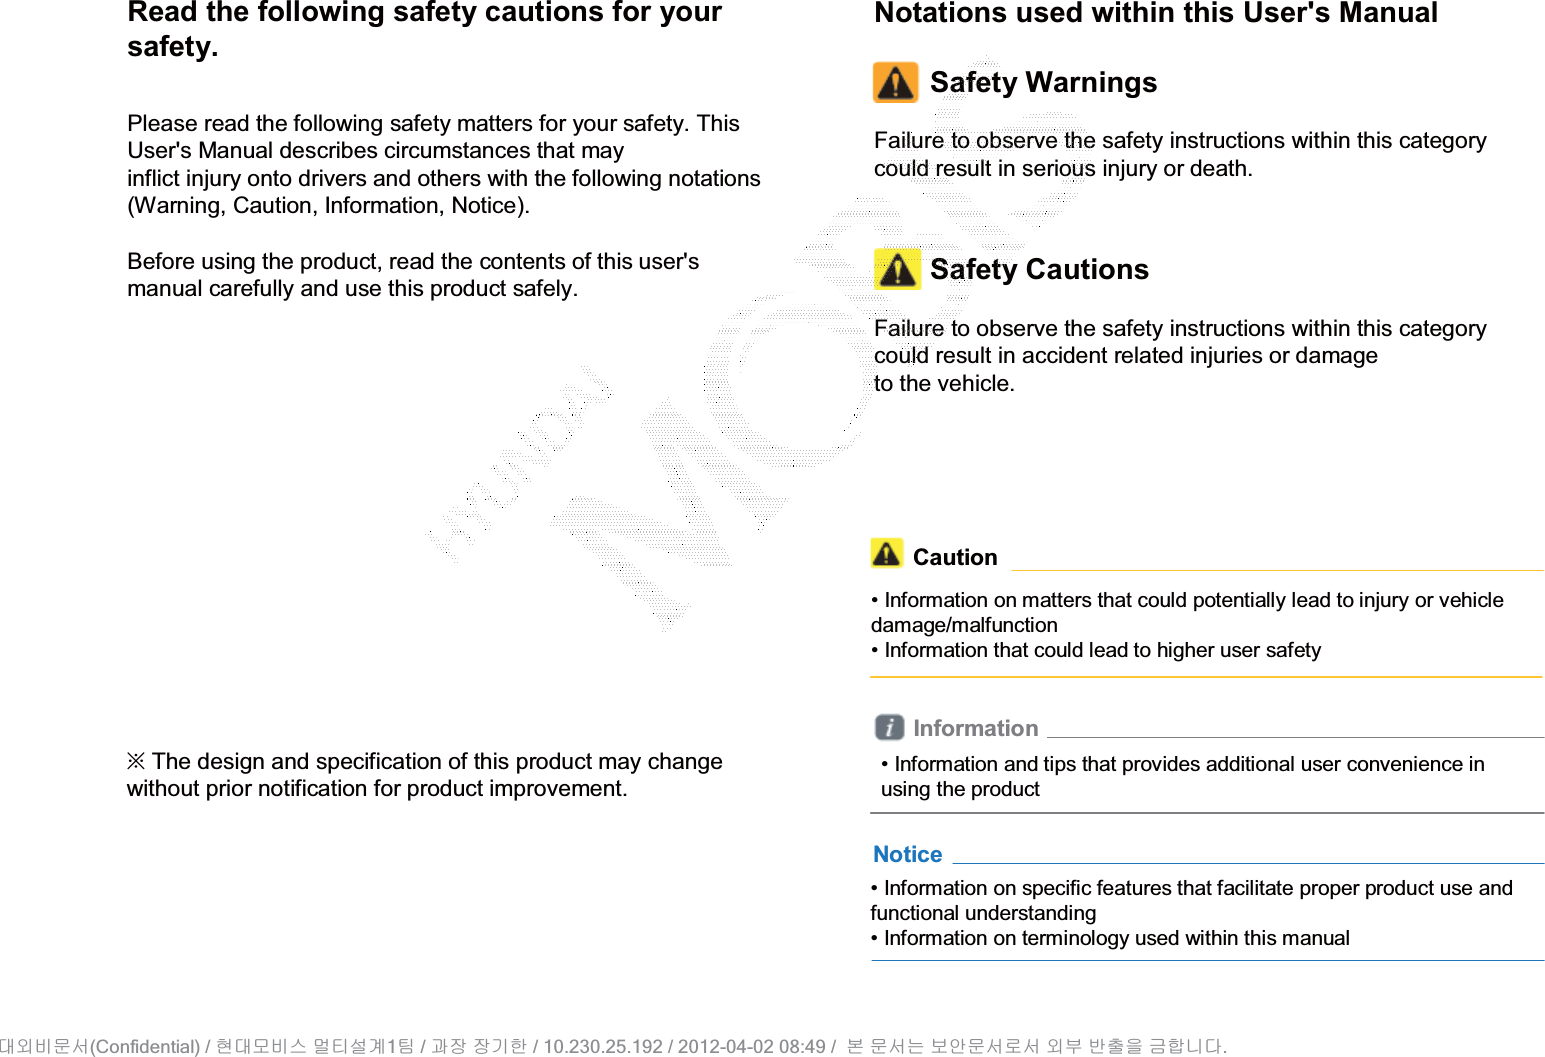 Read the following safety cautions for your safety.Please read the following safety matters for your safety. This User&apos;s Manual describes circumstances that mayinflict injury onto drivers and others with the following notations (Warning, Caution, Information, Notice).Before using the product, read the contents of this user&apos;s manual carefully and use this product safely.• Information on specific features that facilitate proper product use and functional understanding• Information on terminology used within this manualNotice• Information and tips that provides additional user convenience in using the productInformationNotations used within this User&apos;s ManualSafety WarningsFailure to observe the safety instructions within this category could result in serious injury or death.Safety CautionsFailure to observe the safety instructions within this category could result in accident related injuries or damageto the vehicle.ȄThe design and specification of this product may change without prior notification for product improvement.Caution• Information on matters that could potentially lead to injury or vehicle damage/malfunction• Information that could lead to higher user safety(Confidential) /    1  /     / 10.230.25.192 / 2012-04-02 08:49 /             .␴㞬⽸ⱬ㉐ 䜸␴⯜⽸㏘ ⭴䐤㉘᷸ 䐴 Ḱ㣙 㣙ὤ䚐 ⸬ ⱬ㉐⏈ ⸨㙼ⱬ㉐⦐㉐ 㞬⺴ ⵌ㻐㡸 Ἴ䚝⏼␘